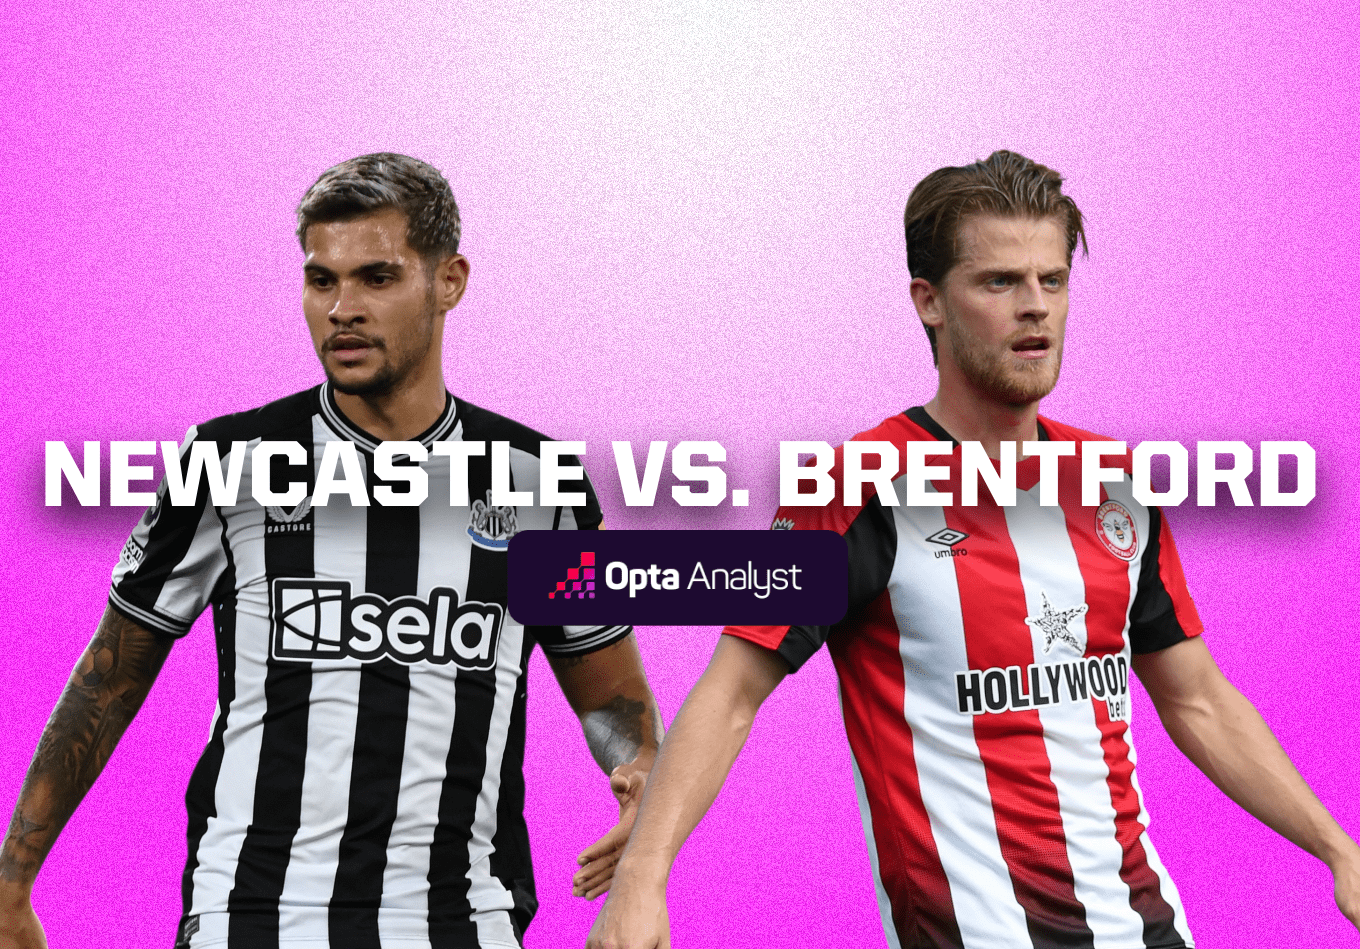 Newcastle United vs Brentford: Prediction and Preview | The Analyst